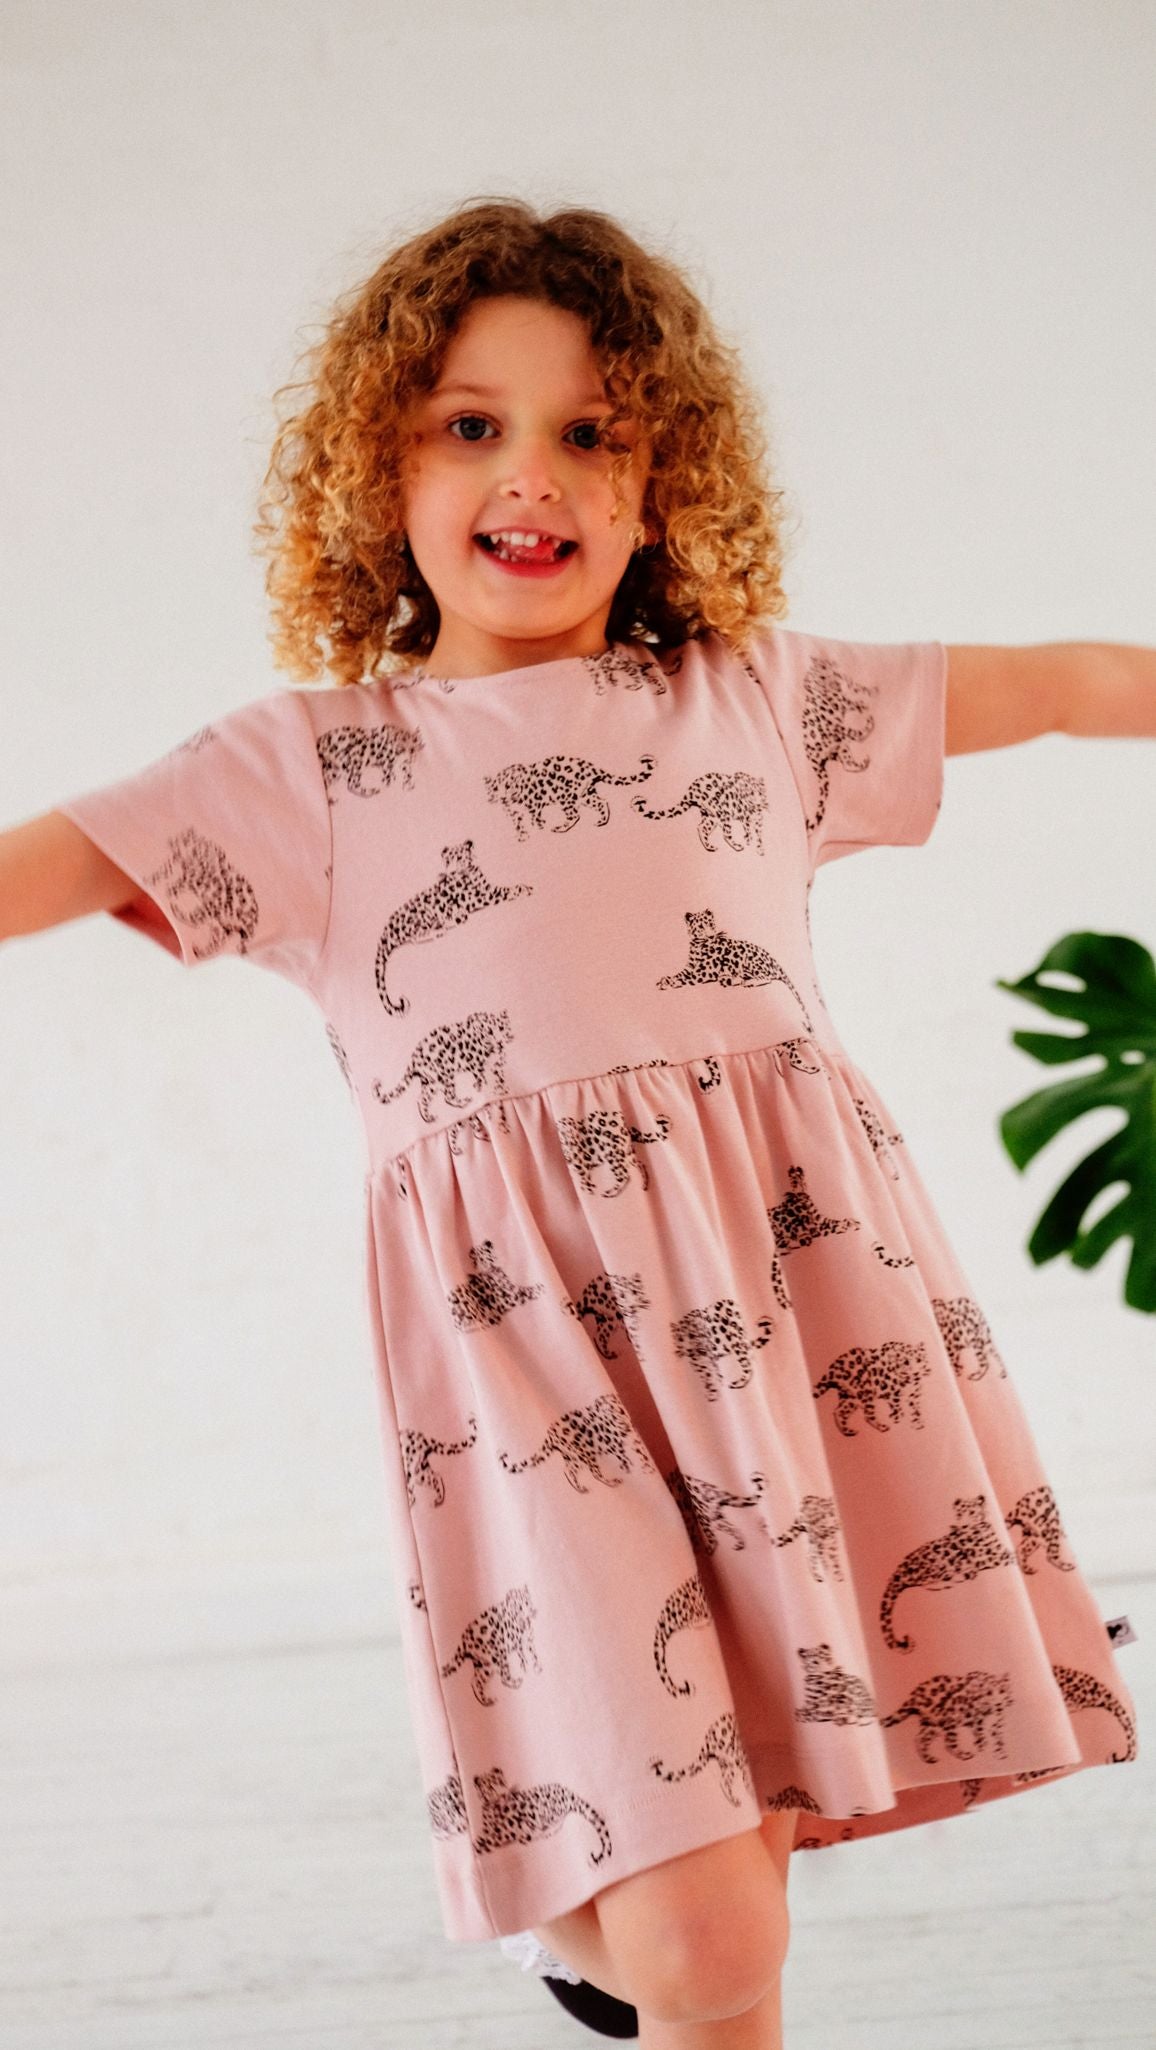 Lifestyle shot of girlwearing the leopard dress. She has curly hair and is holding her arms out to either side, facing the camera.